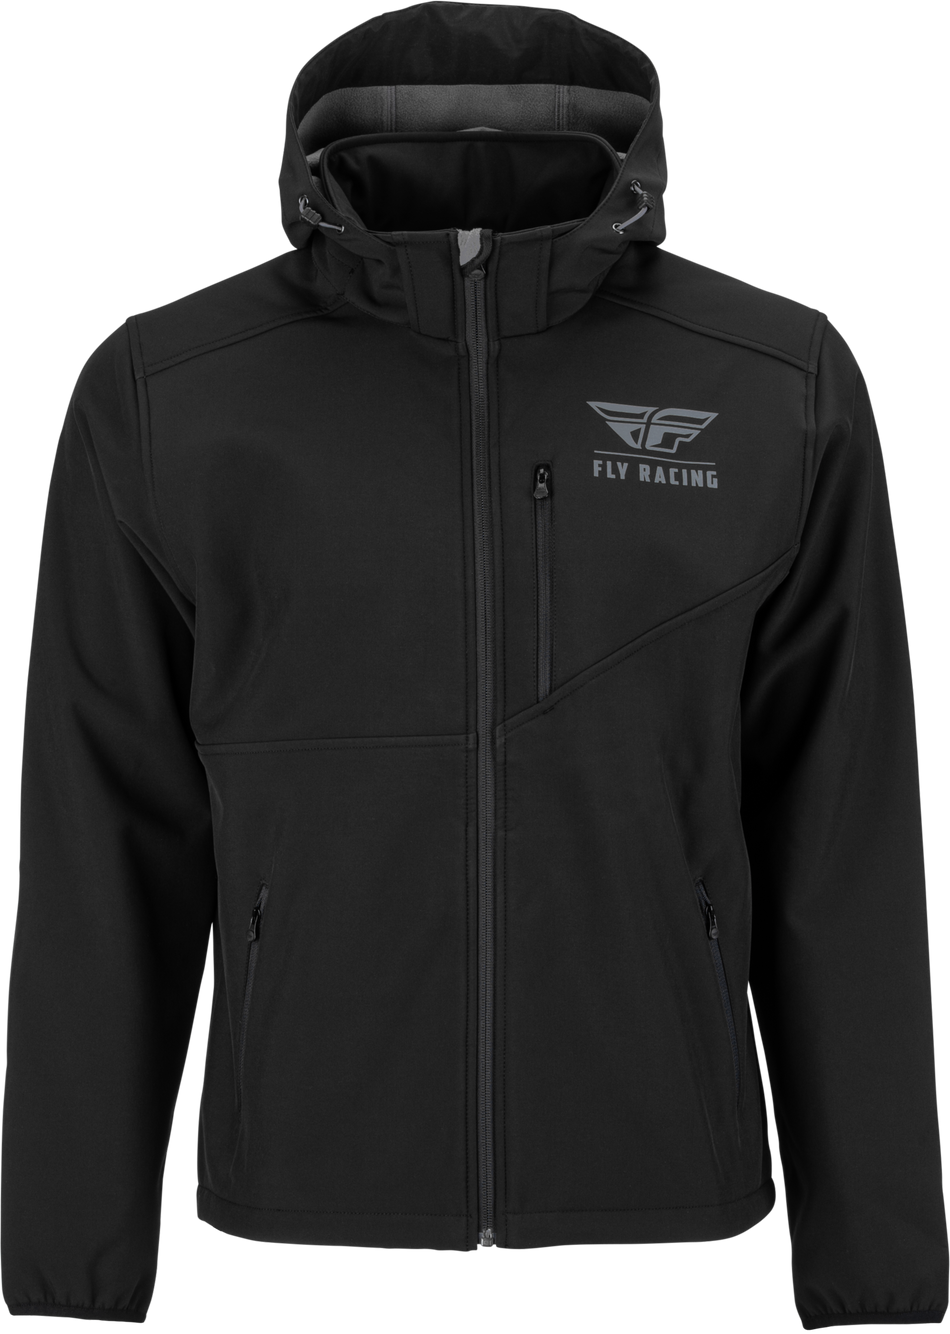 FLY RACING Checkpoint Jacket Black Lg 354-6383L